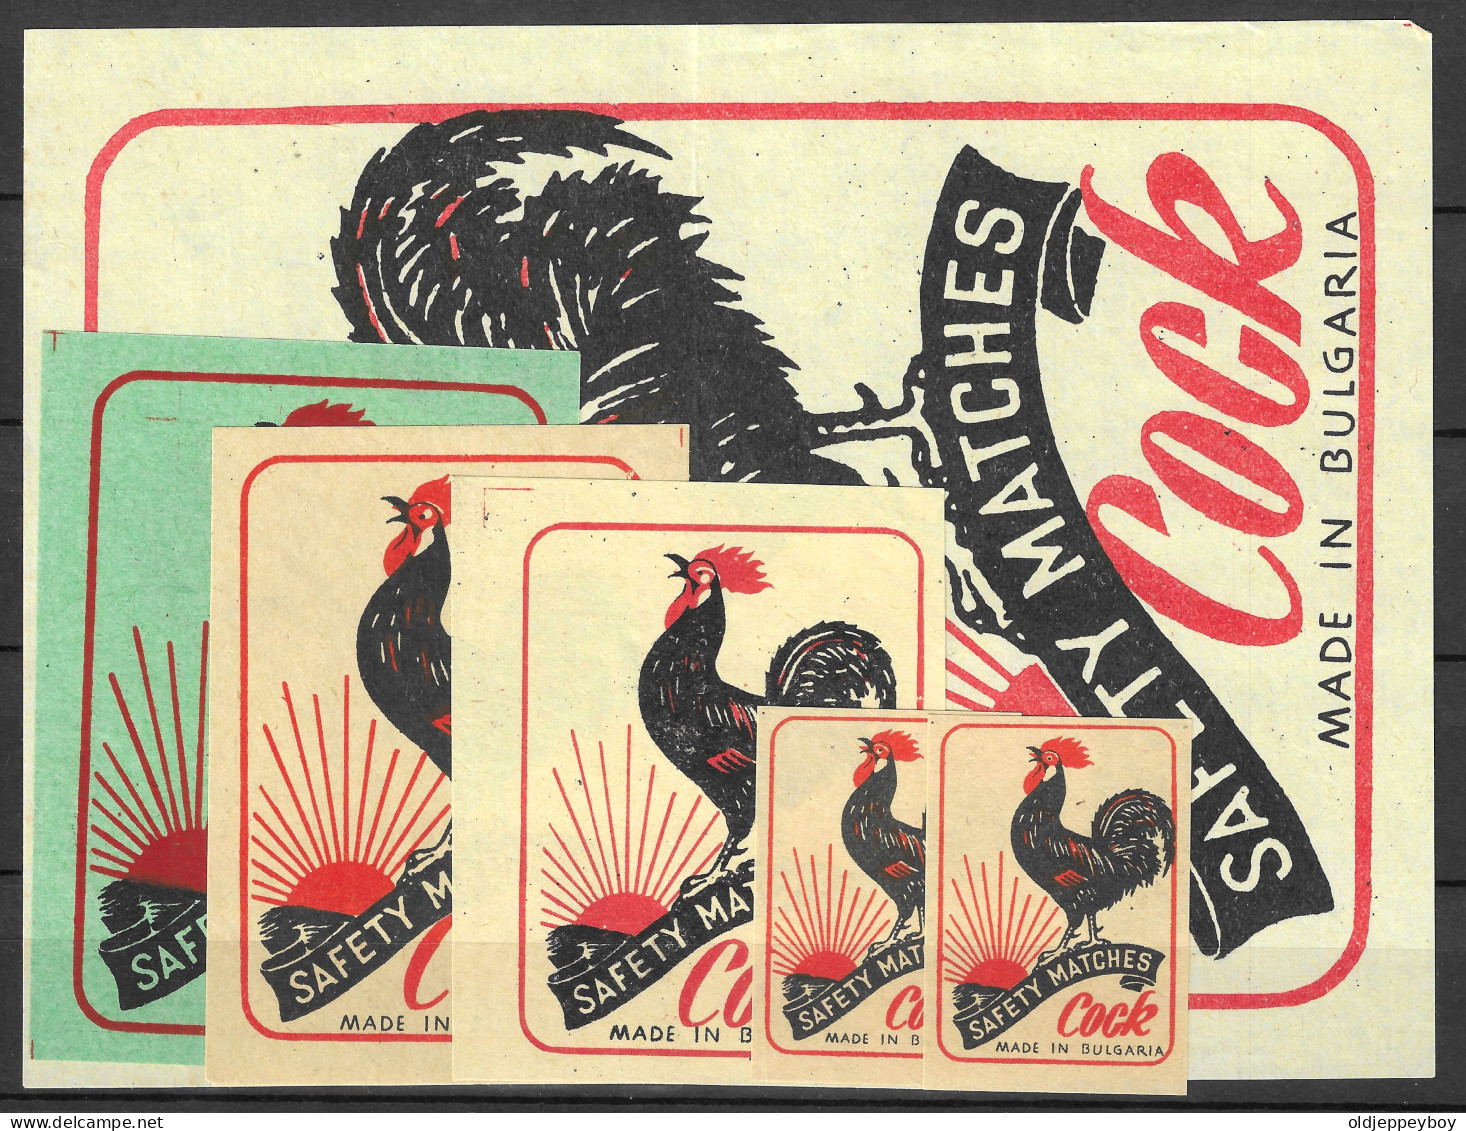  MADE IN BULGARIA MATCHBOX LABEL "COCK "  FULL SET OF 6 DIF SIZES SEE SCAN FOR SIZES EXTRA  LARGE RARE - Zündholzschachteletiketten